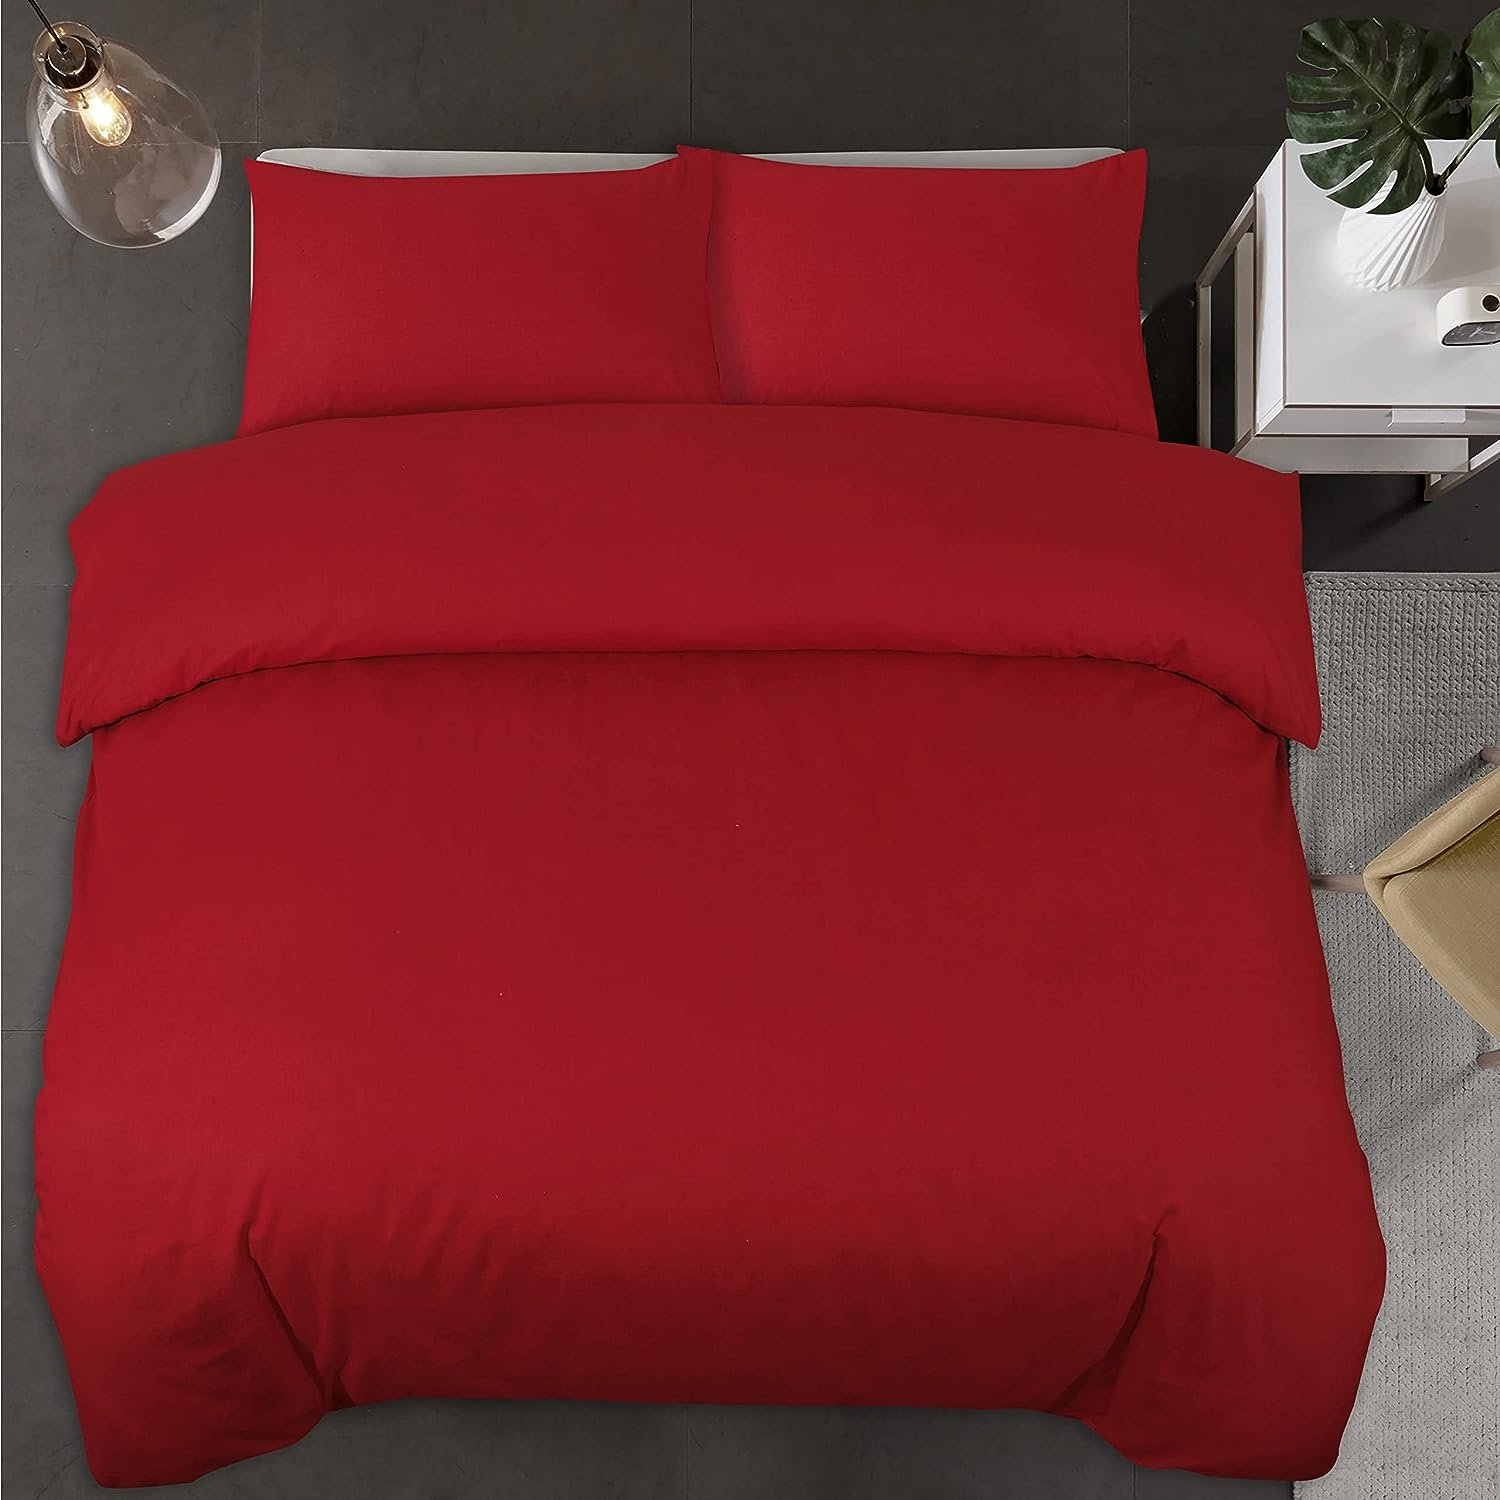 Belle Home Red Duvet Cover Set Review